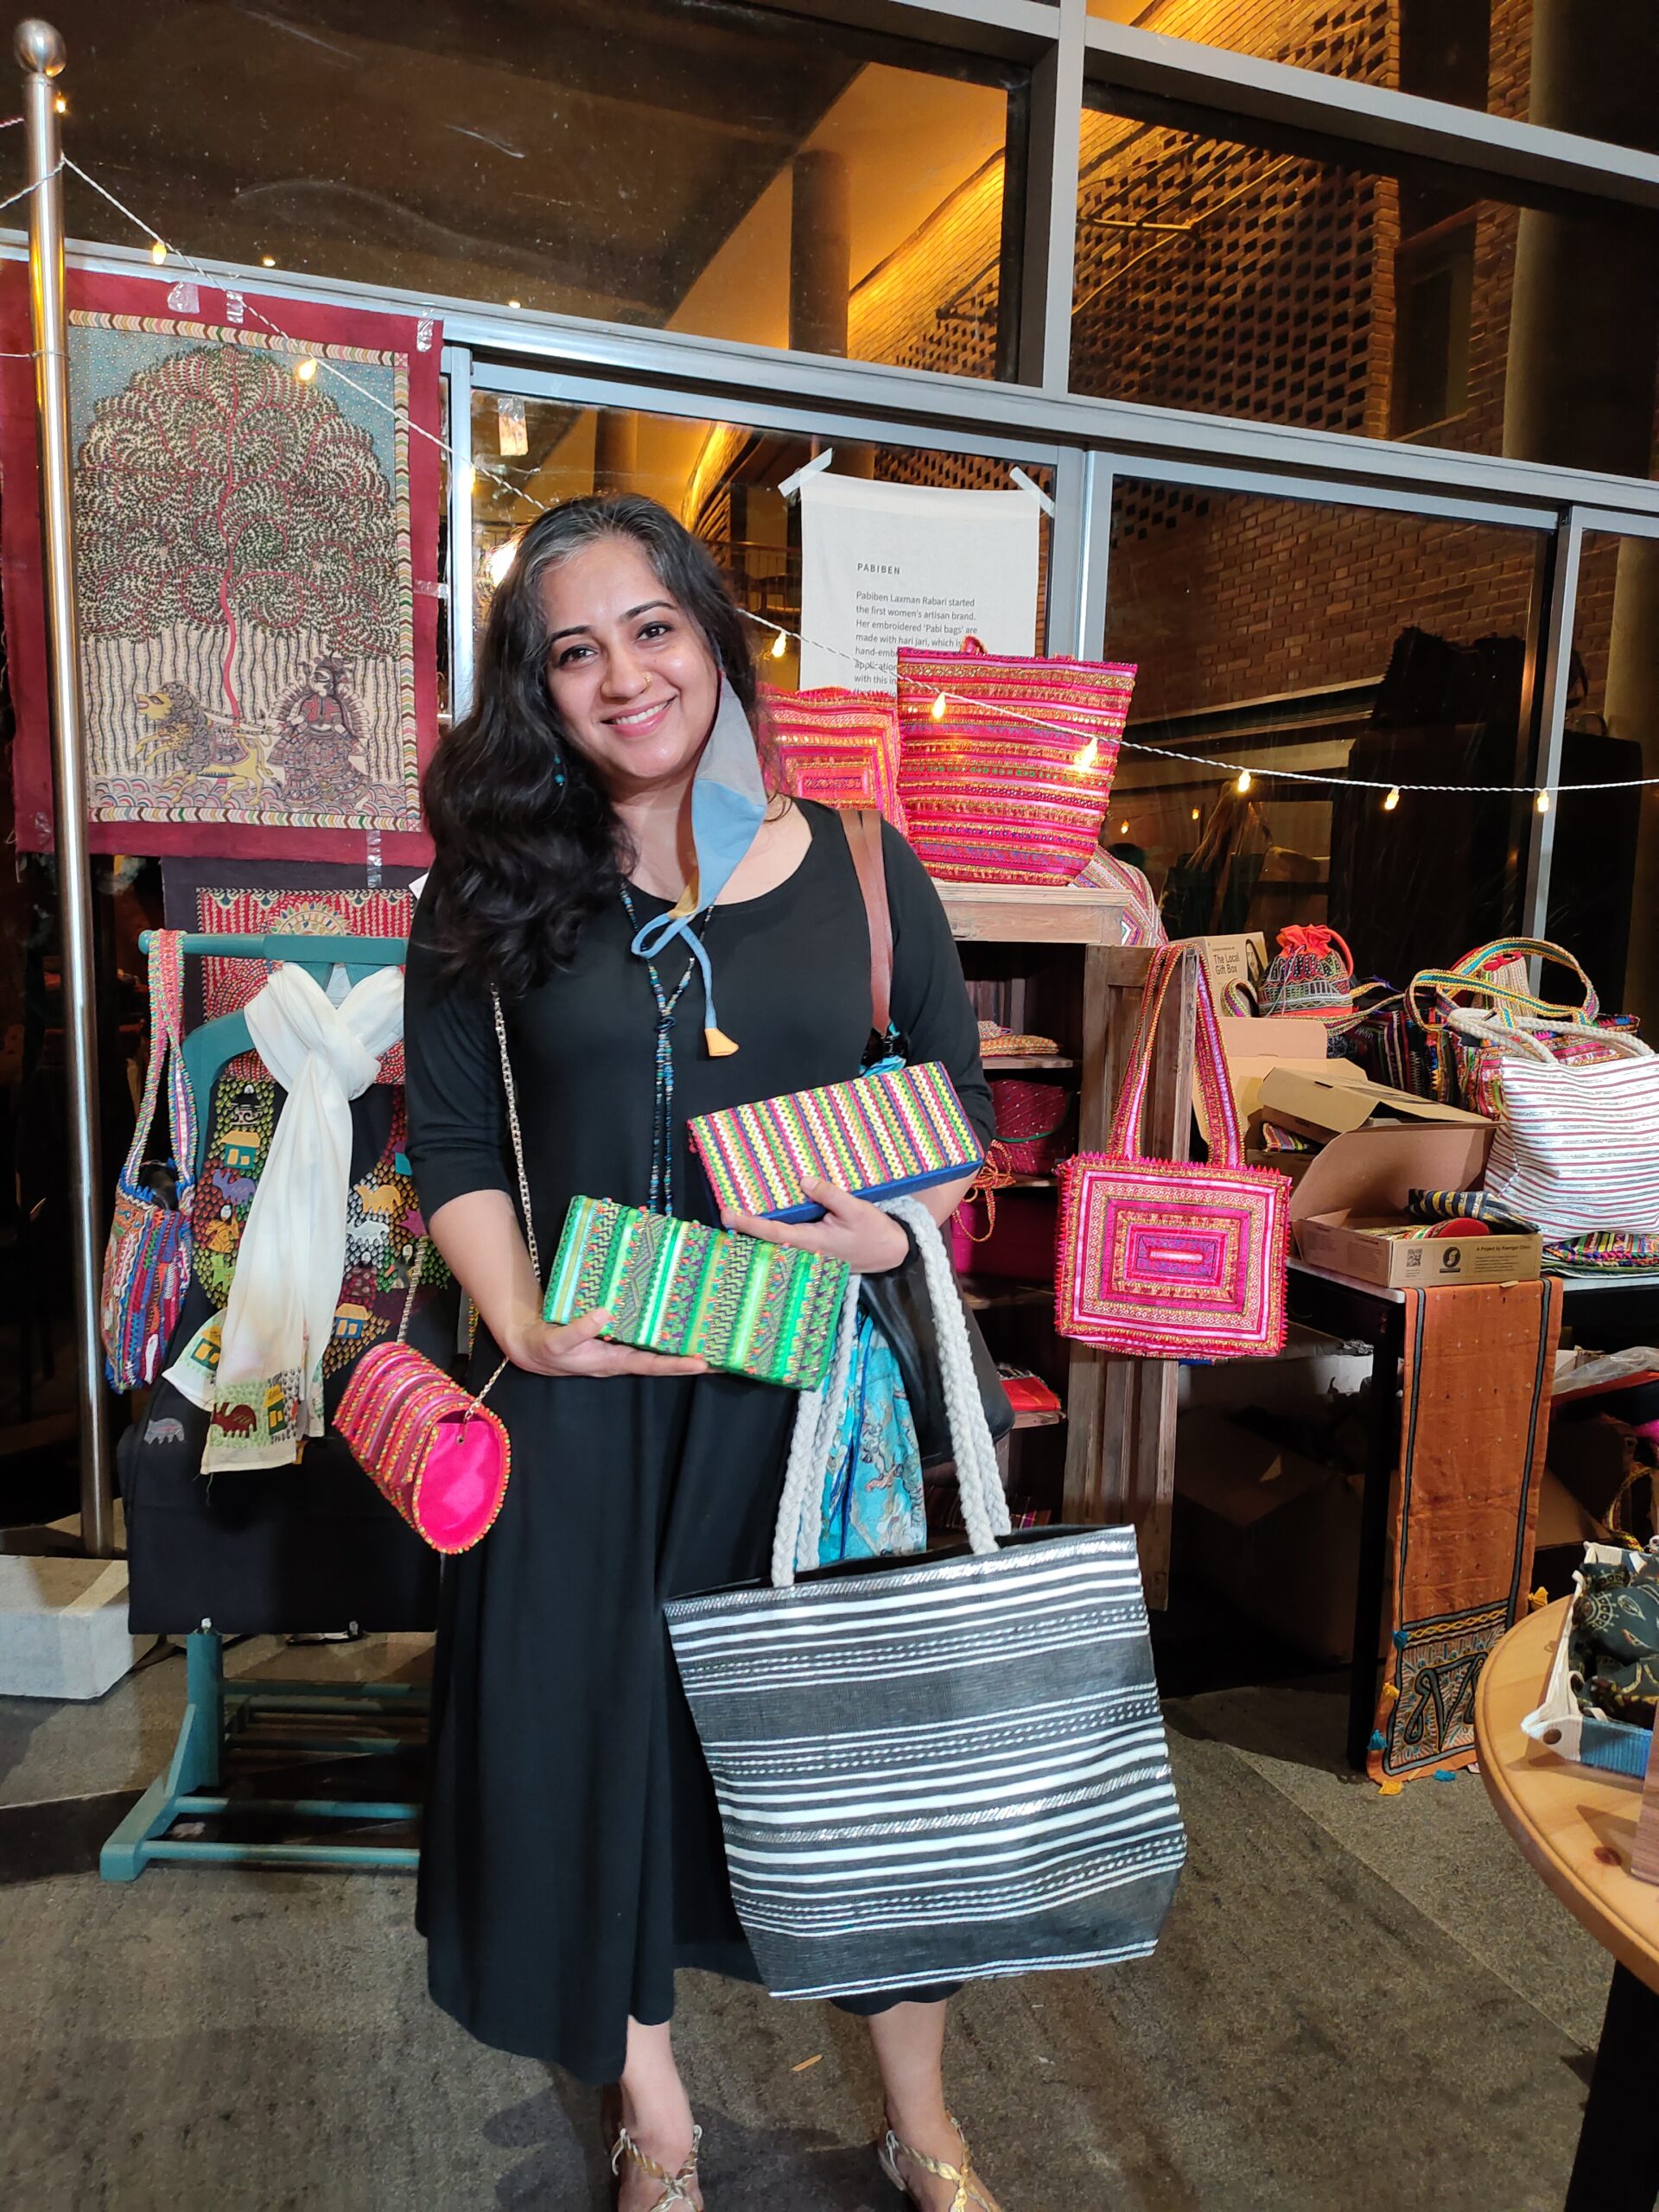 Rising above odds, this artisan entrepreneur invented a new form of  embroidery, established a global brand